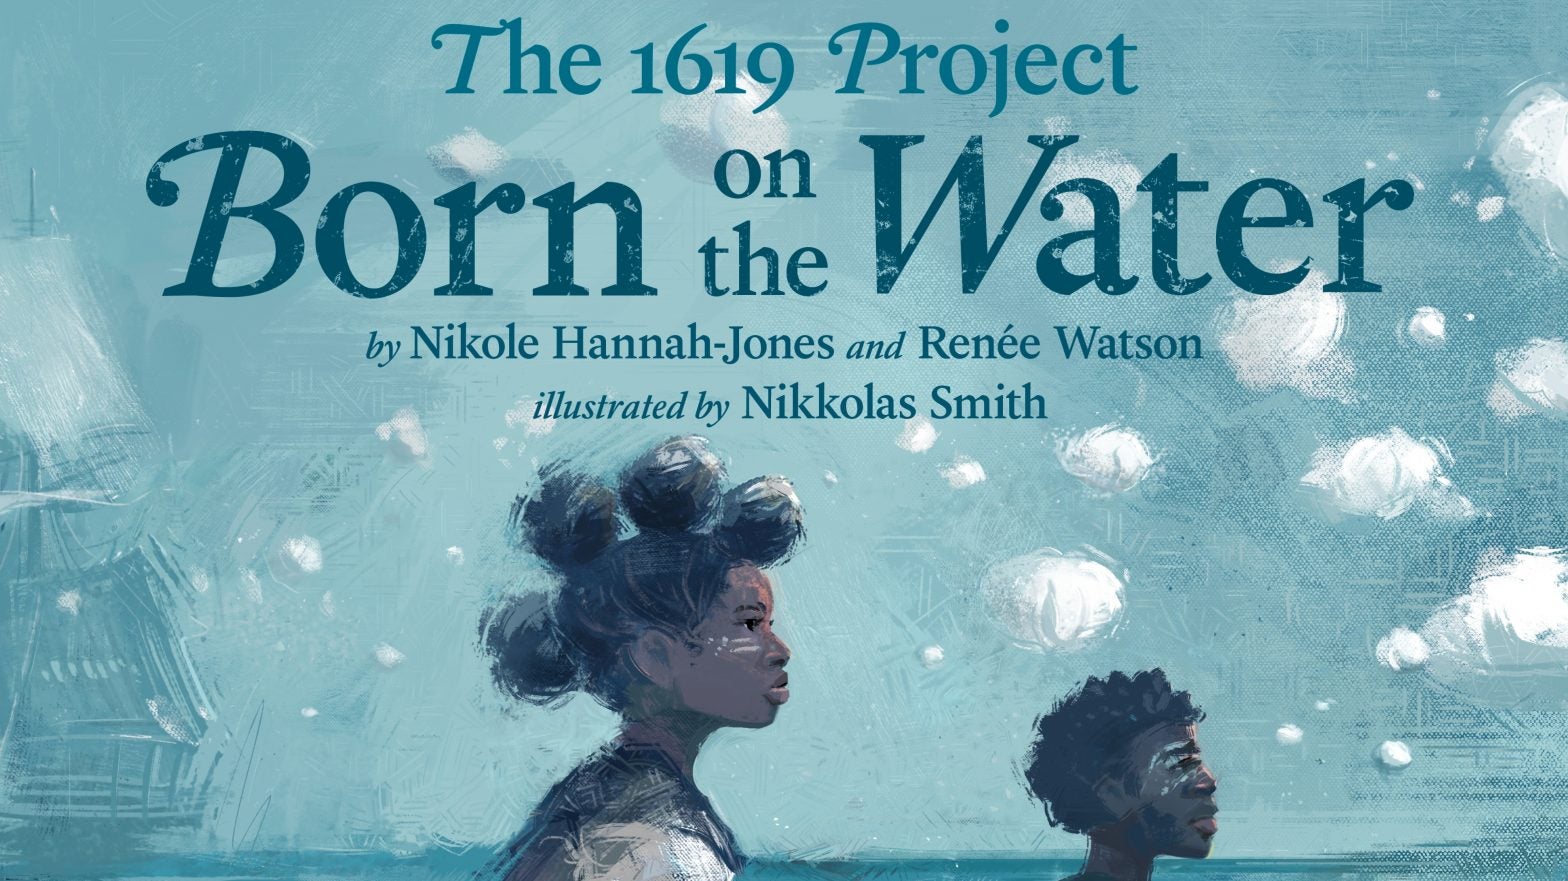 EXCLUSIVE: Nikole Hannah-Jones and Co-Author Renée Watson Debut 'Born on the Water,' a New Children's Book Based on The 1619 Project